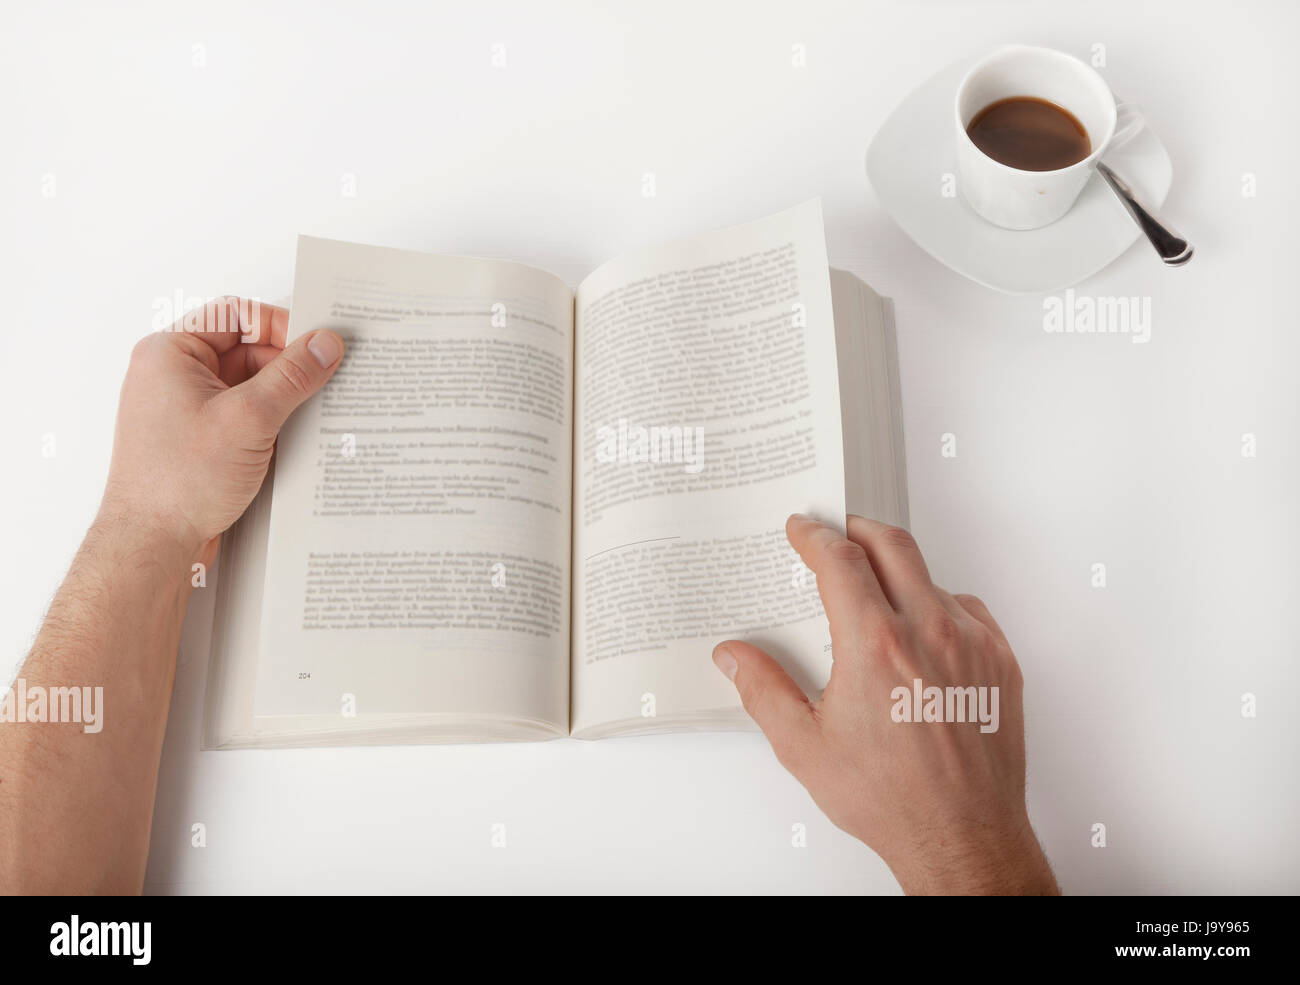 write, wrote, writing, writes, student, learns, reads, book, coffee, man, Stock Photo